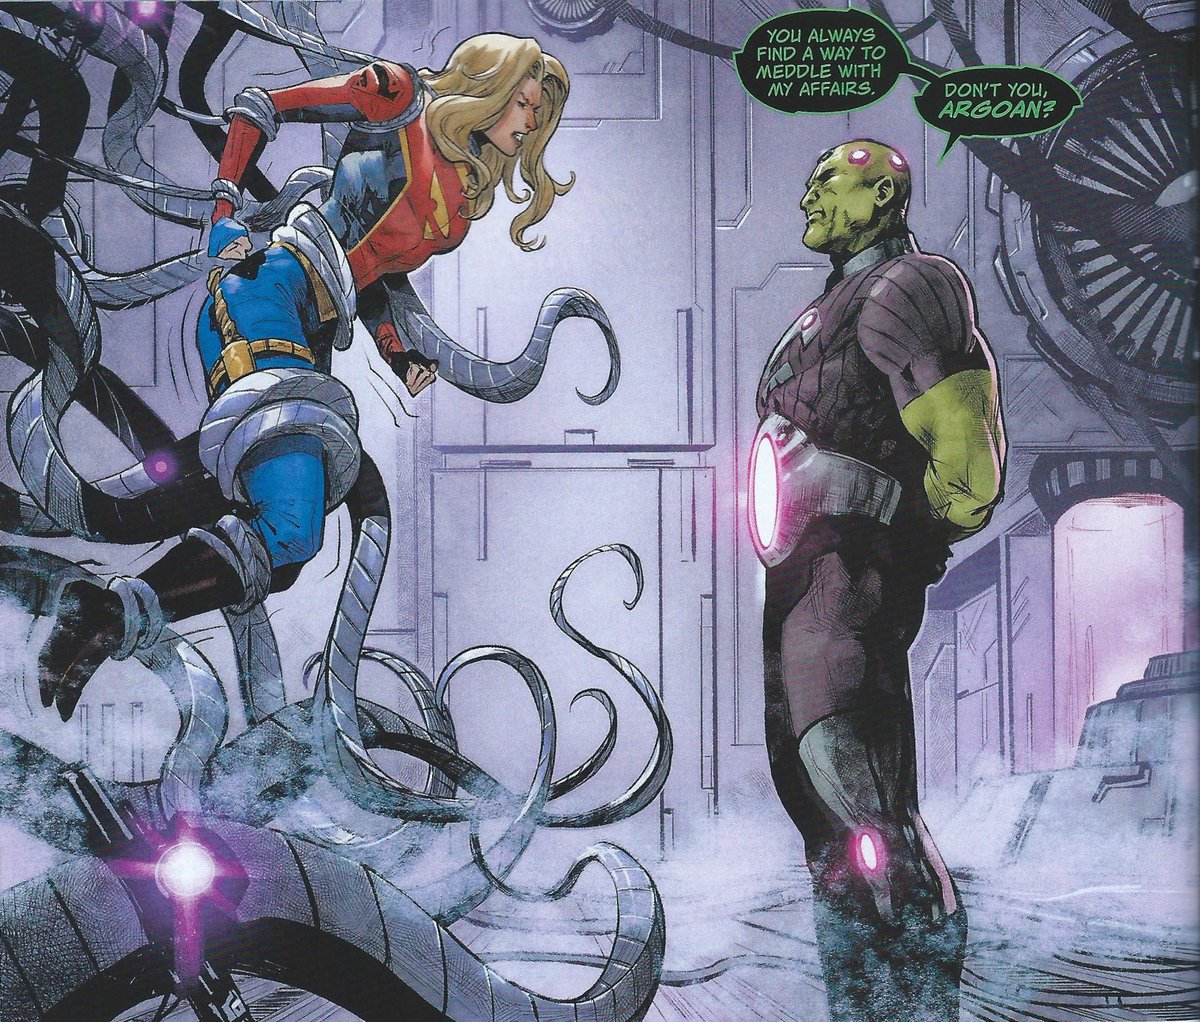 My review of Action Comics #1065: comicboxcommentary.blogspot.com/2024/05/review… A Supergirl-centric issue as Kara leads an assault in the Brainiac ship. She's a leader here. Fearless. Feels like Brainiac is her arch-enemy. Plus Vril Dox !!! Great art! @Williamson_Josh @RafaSandoval75 @Mikemaluk